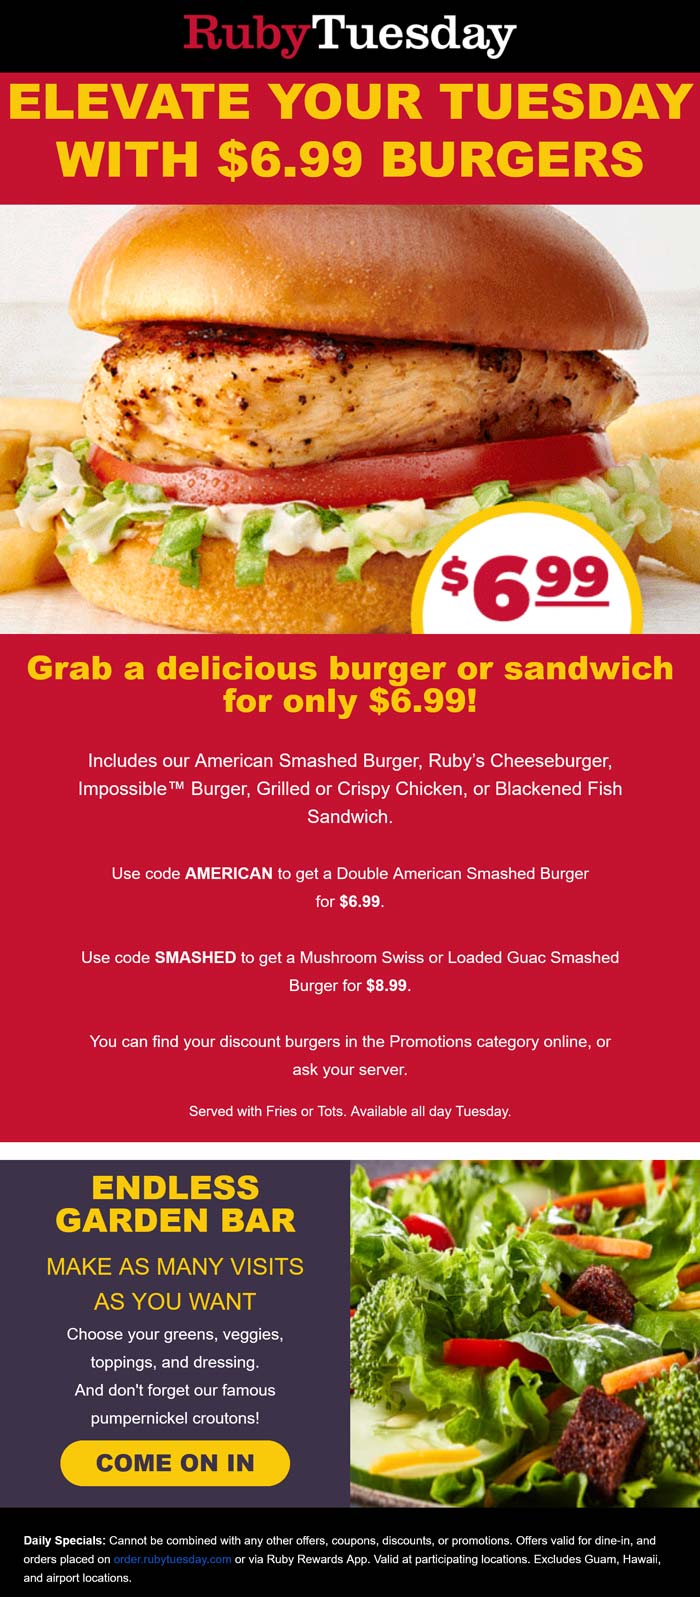 Ruby Tuesday restaurants Coupon  Chicken, fish sandwich or double cheeseburger meals = $7 today at Ruby Tuesday via promo code AMERICAN#rubytuesday 